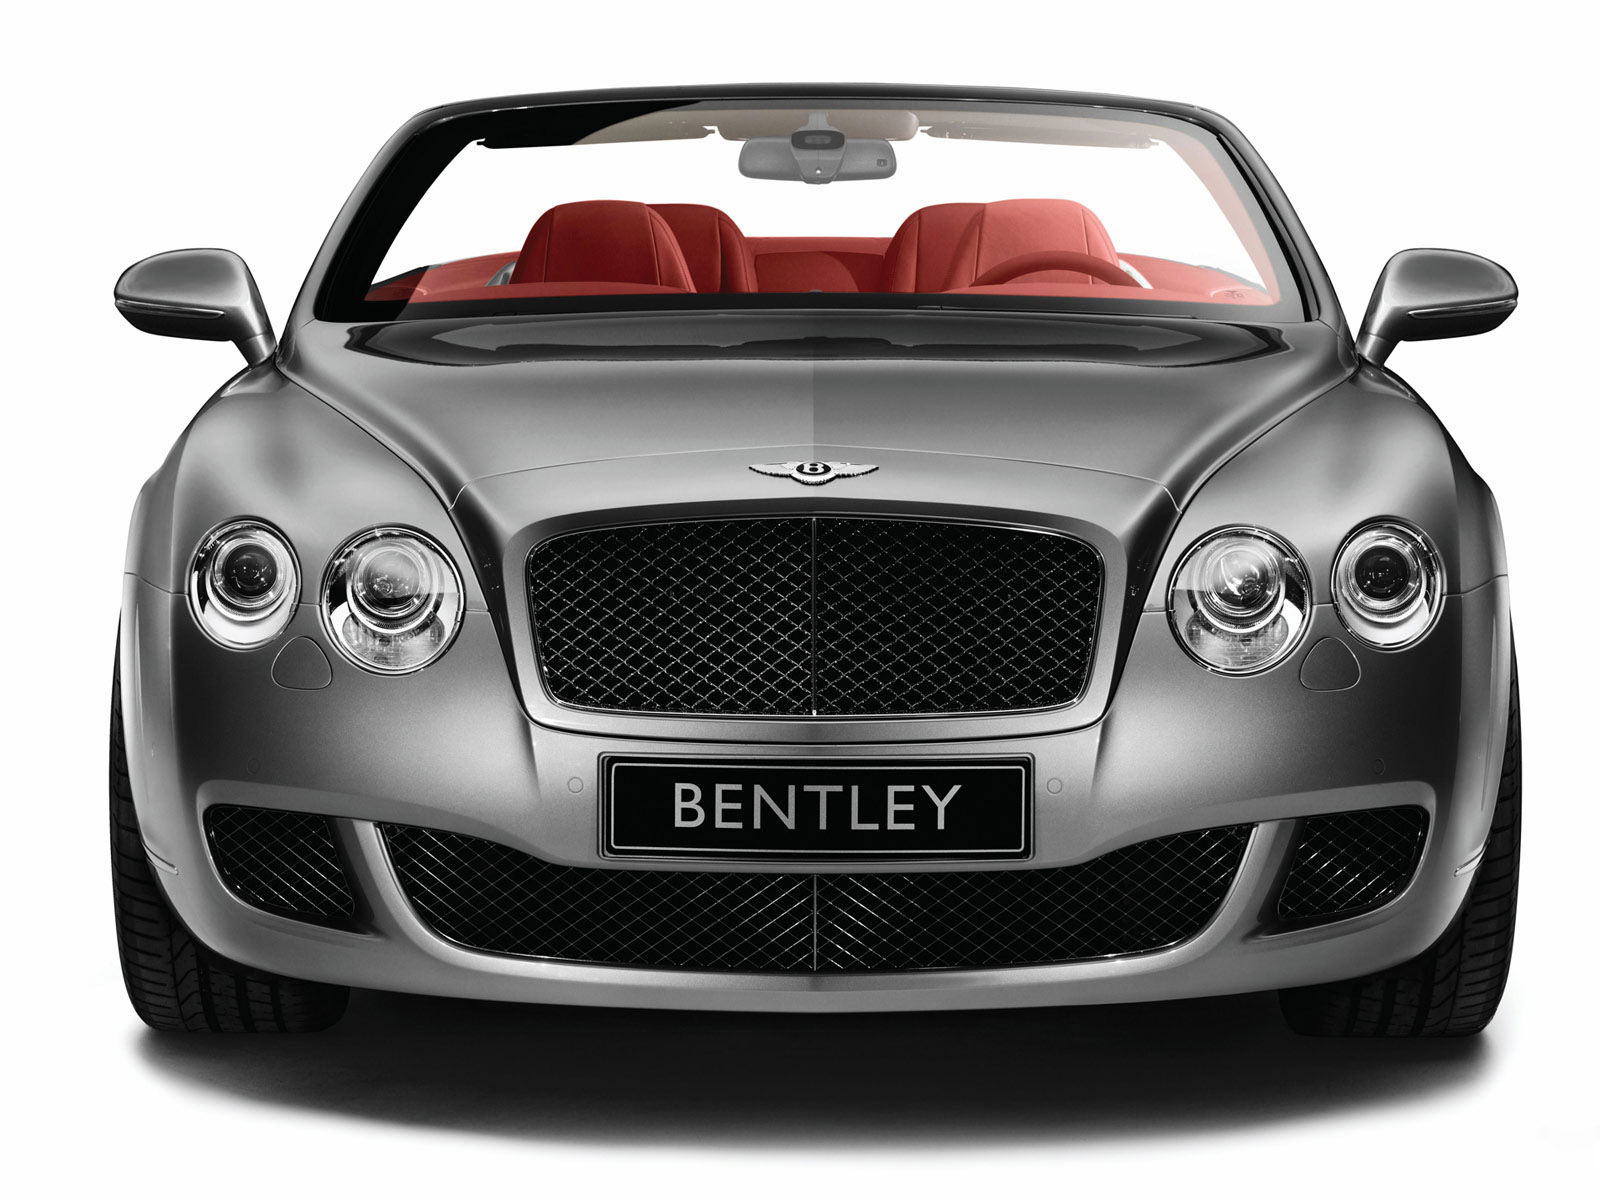 bentley's luxury car is shown in this illustration